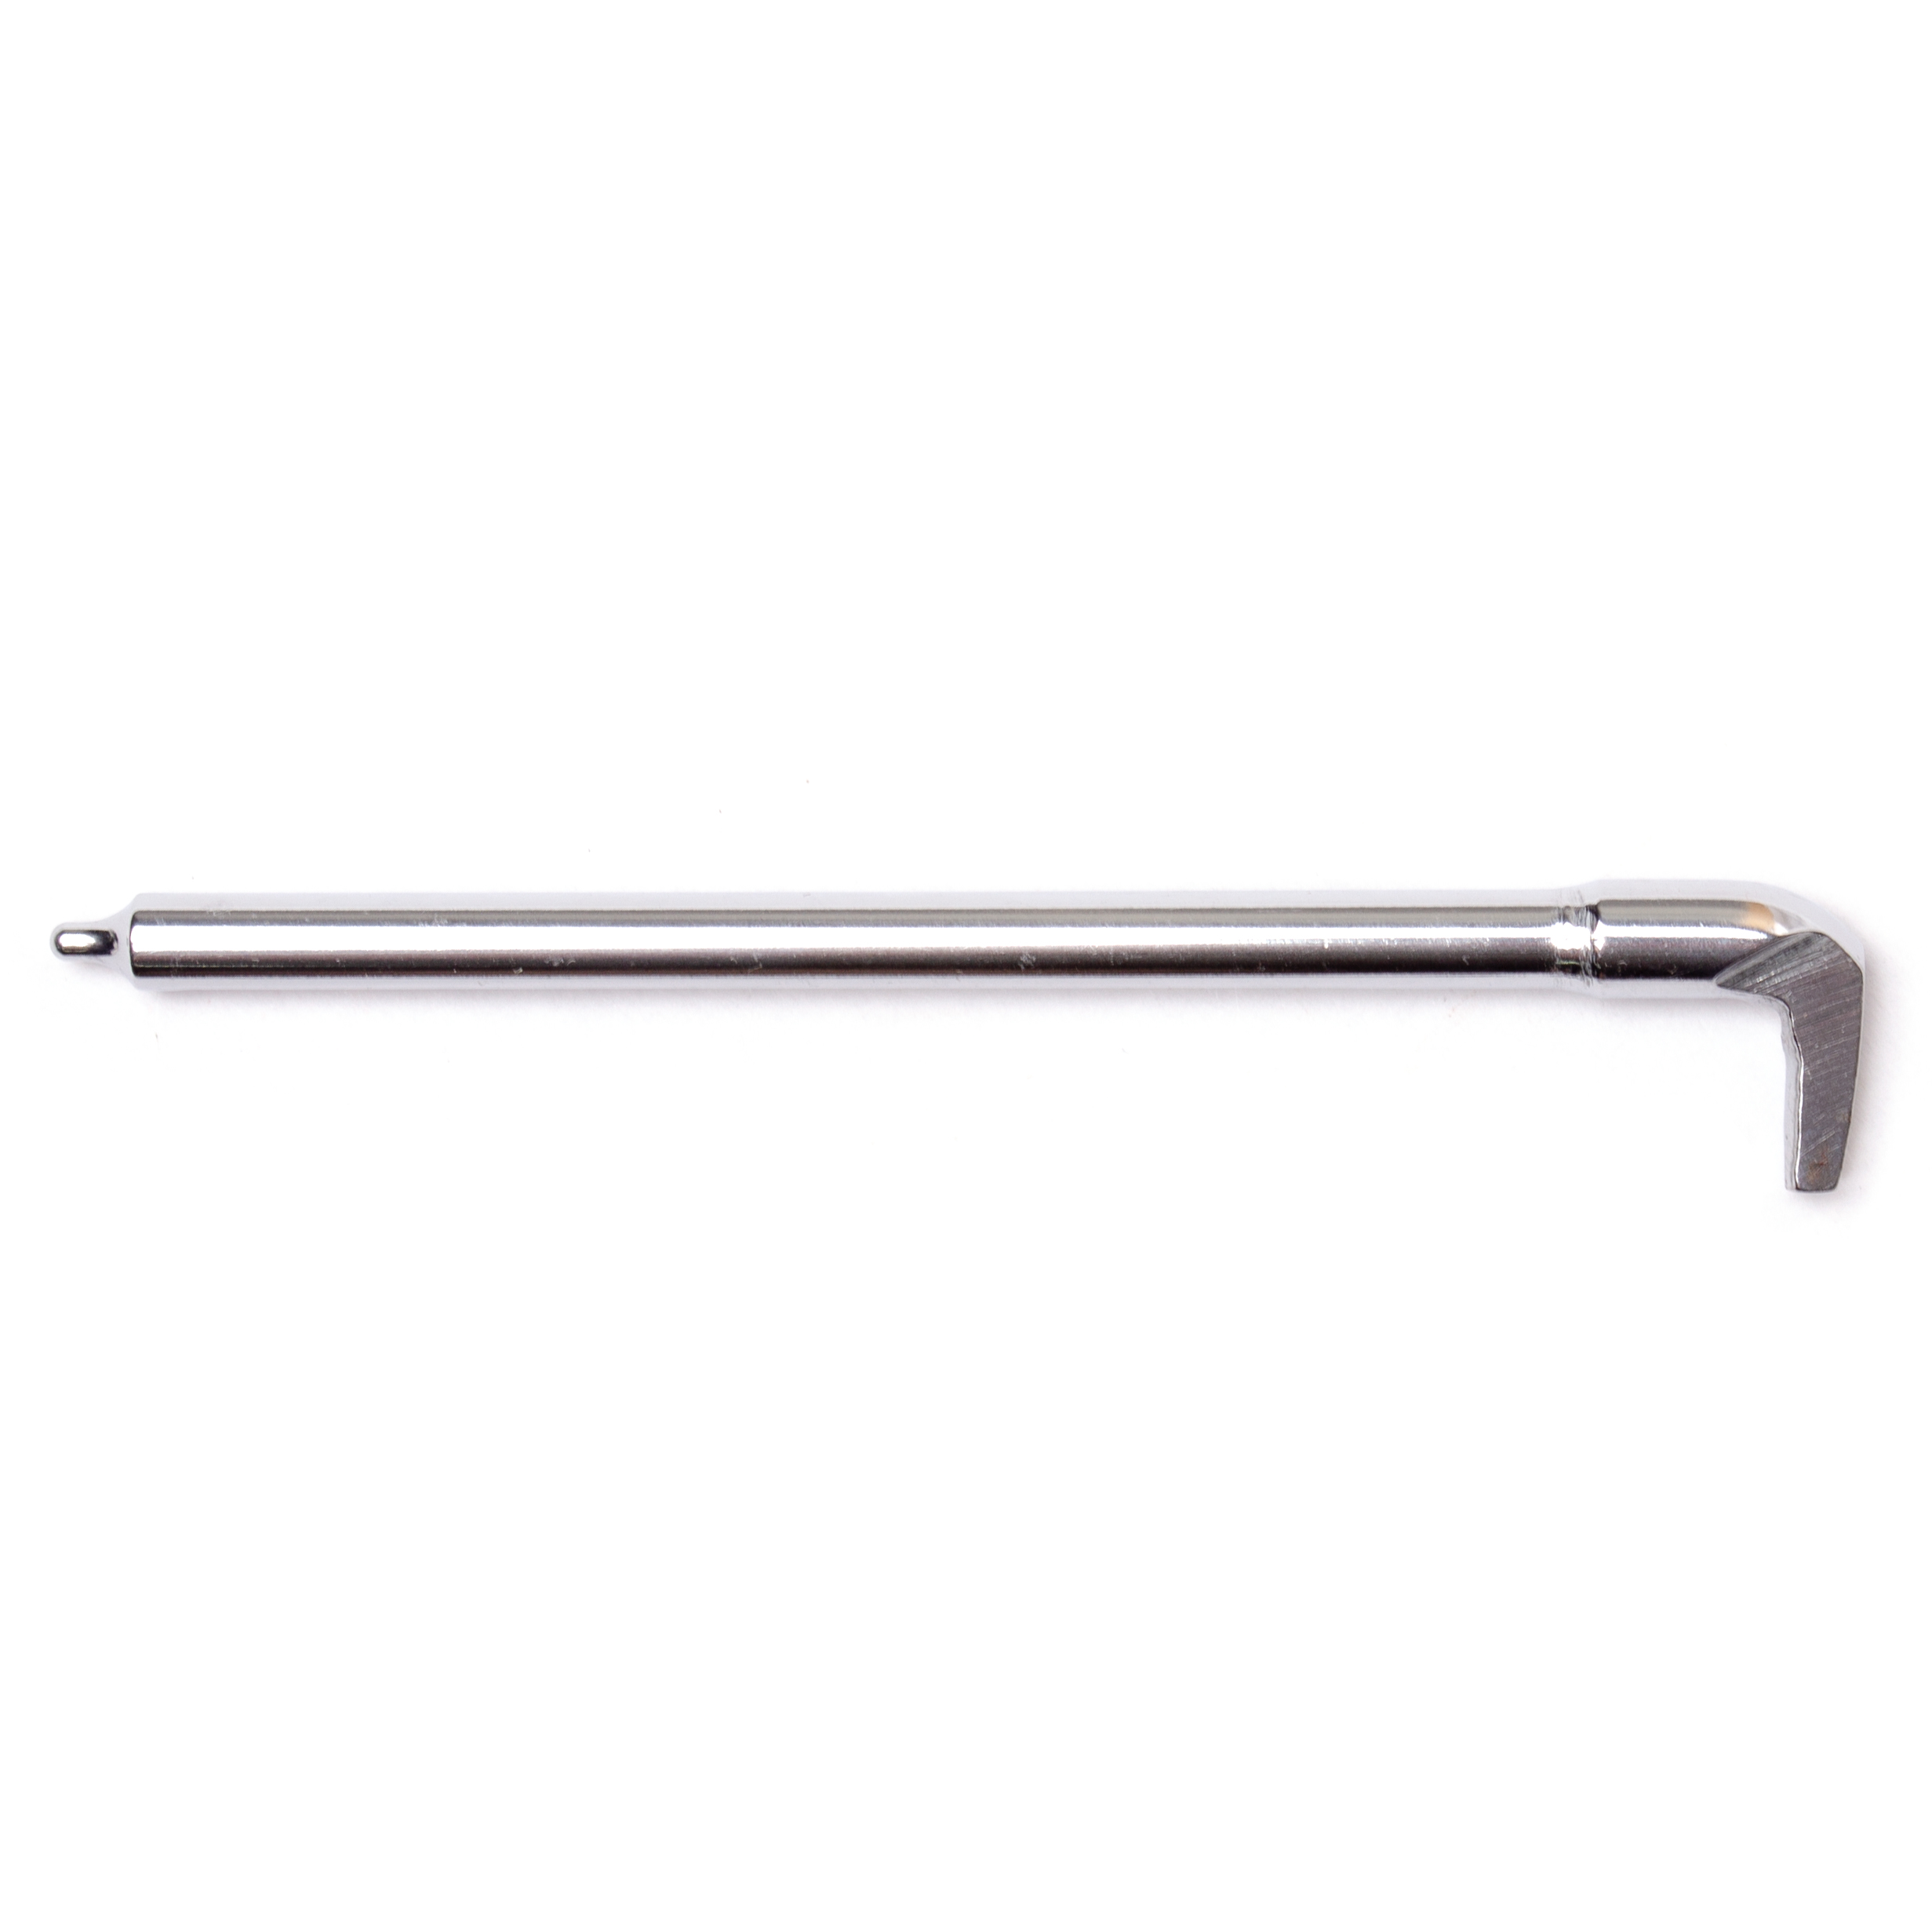 M14 Firing Pin Chrome Plated MIL-SPEC Current Production M14 and M1A Rifles-img-1